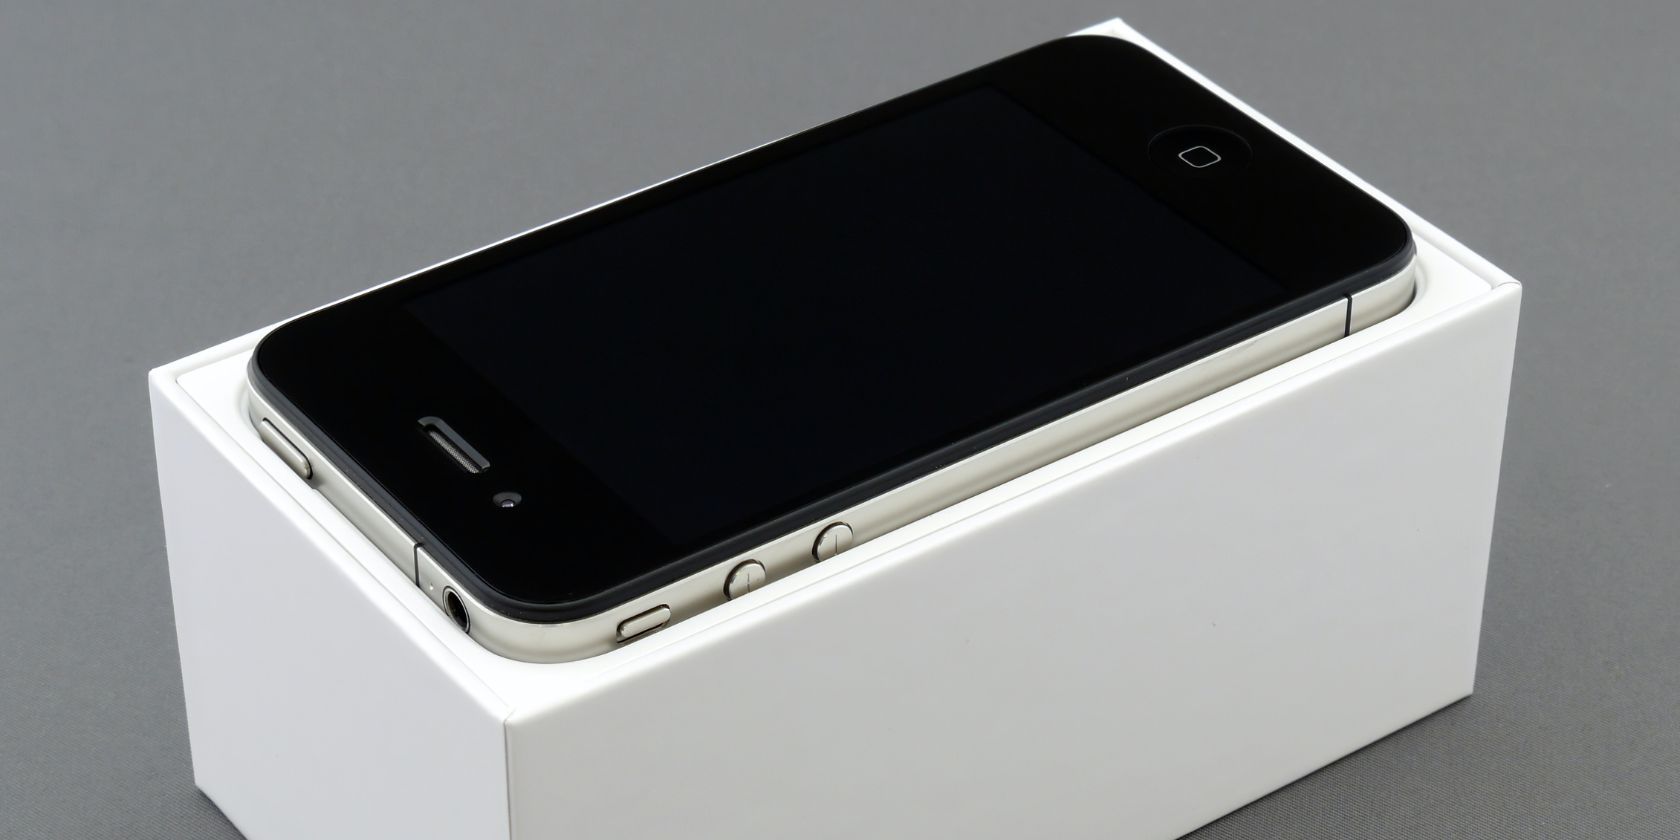 Apple iPhone 4S Reviews, Pros and Cons